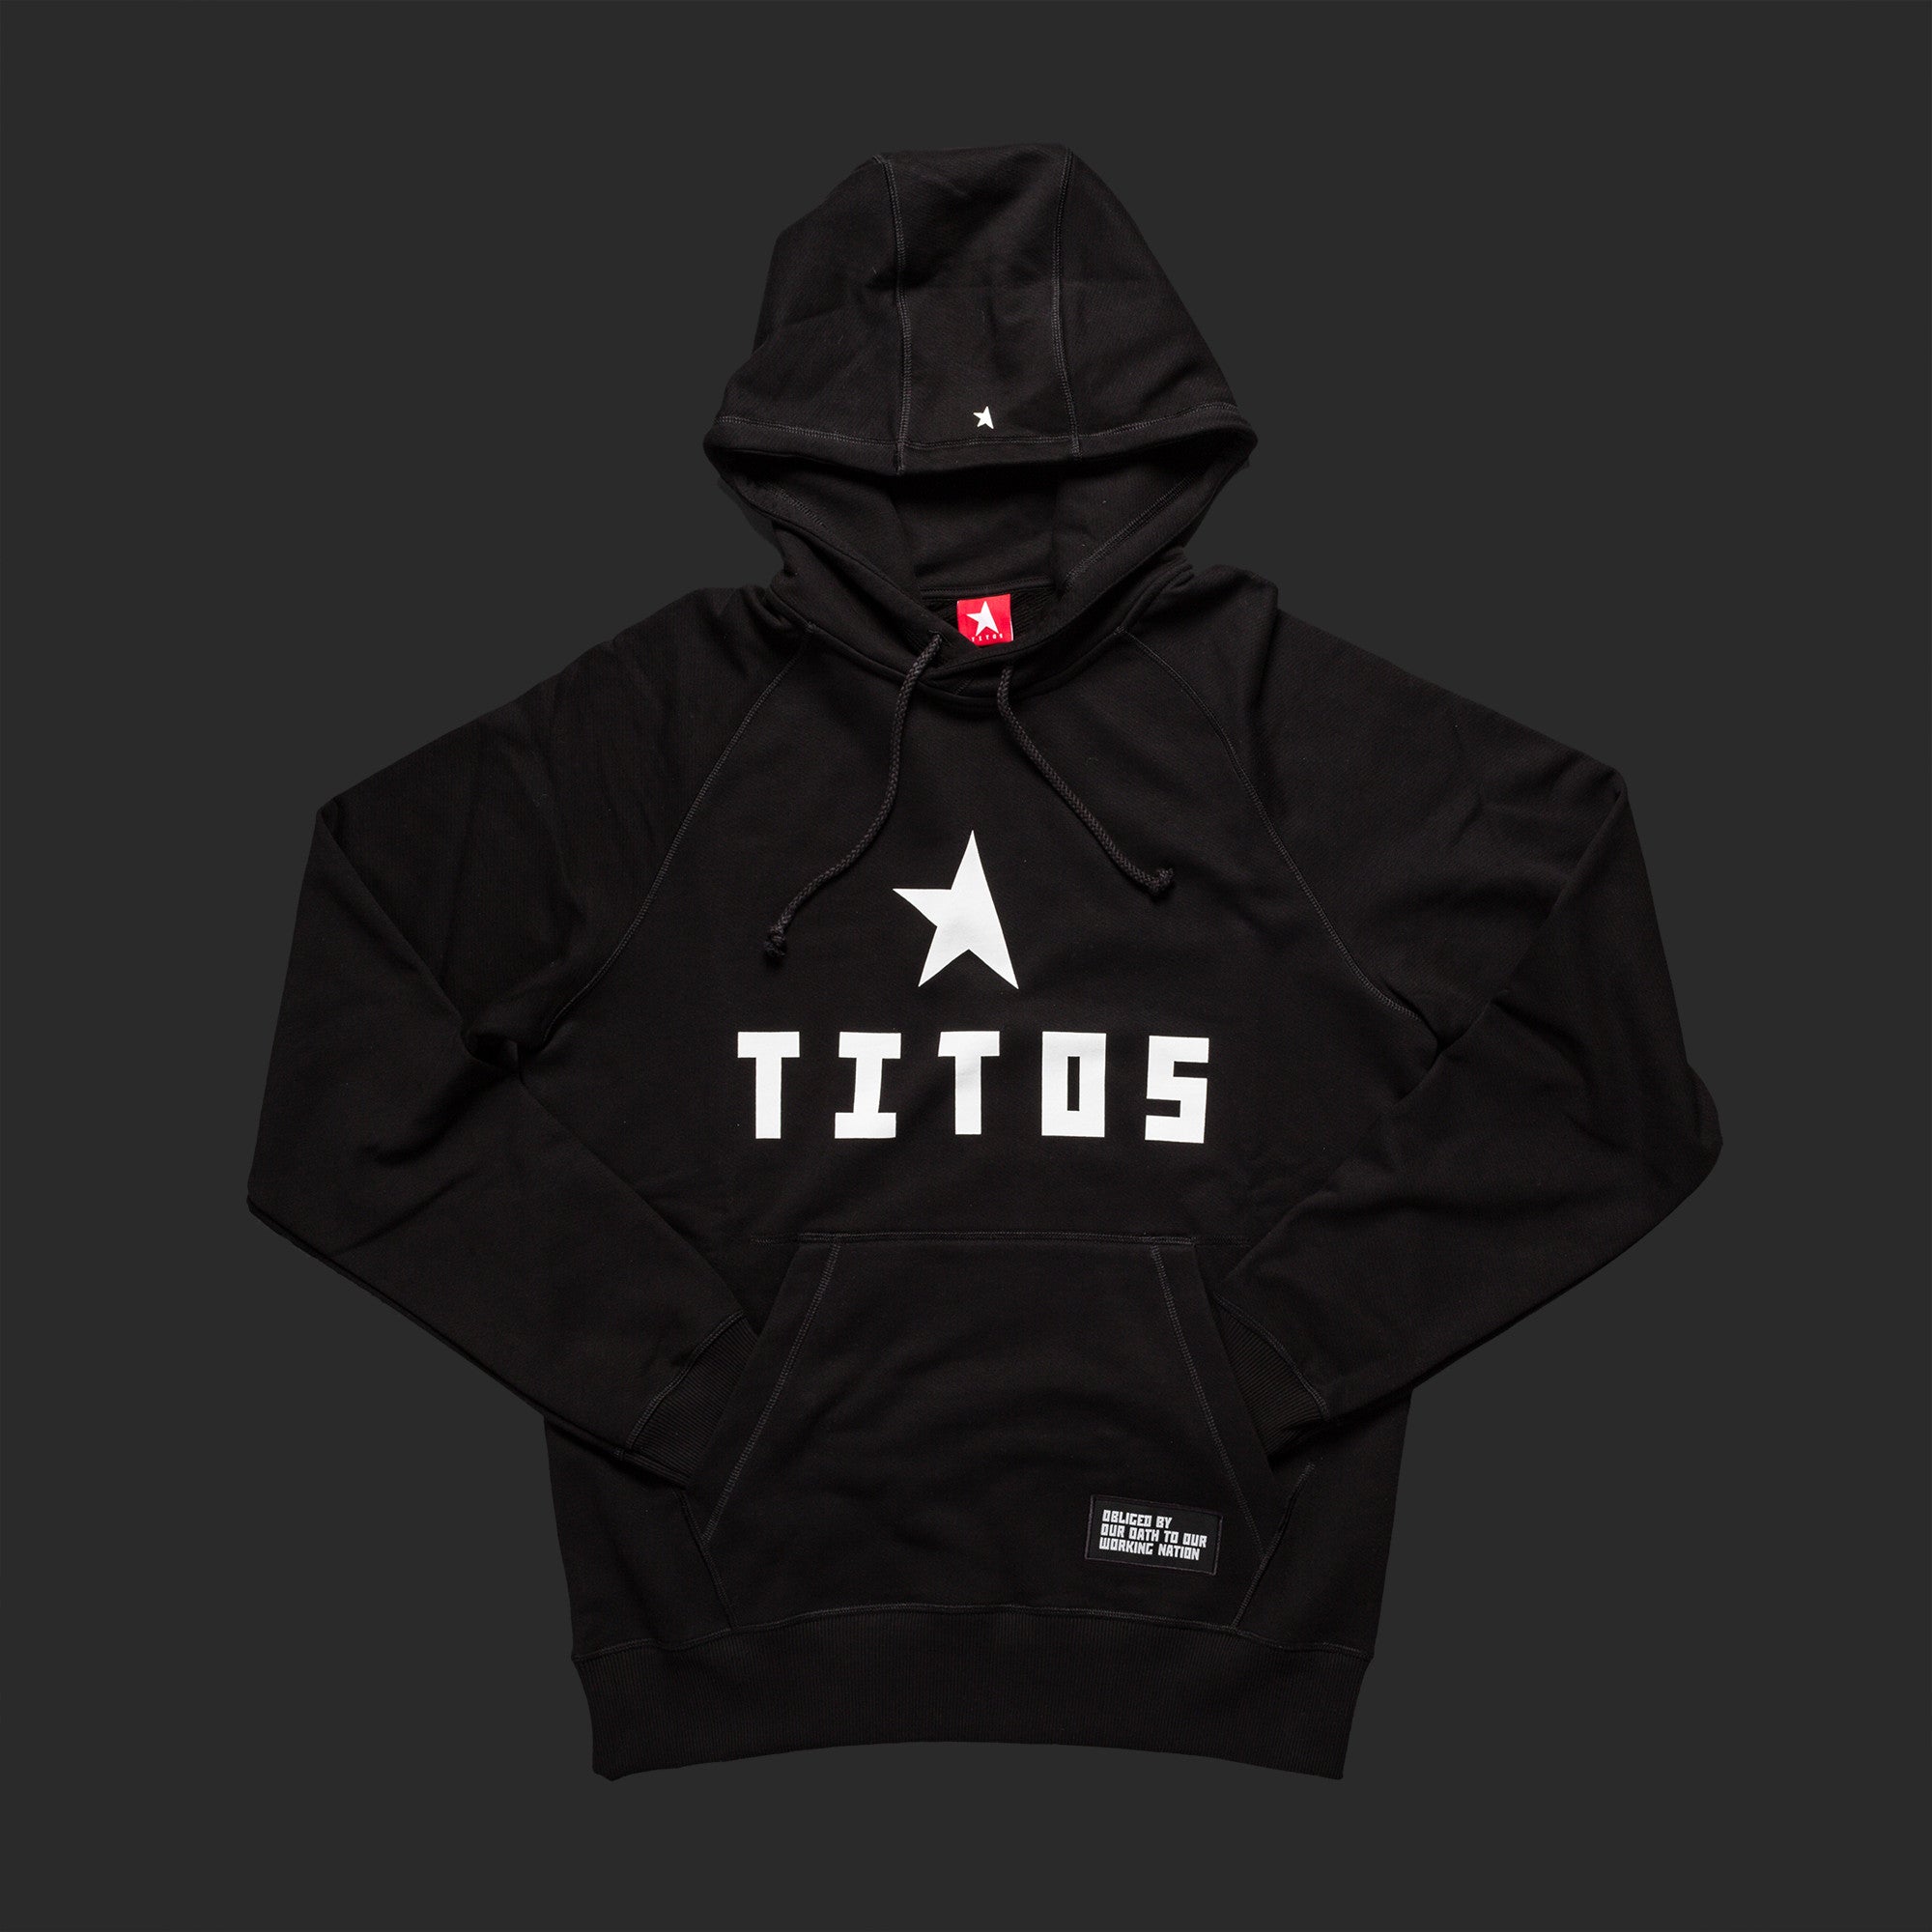 8th TITOS hoodie black/white with star + letters logo